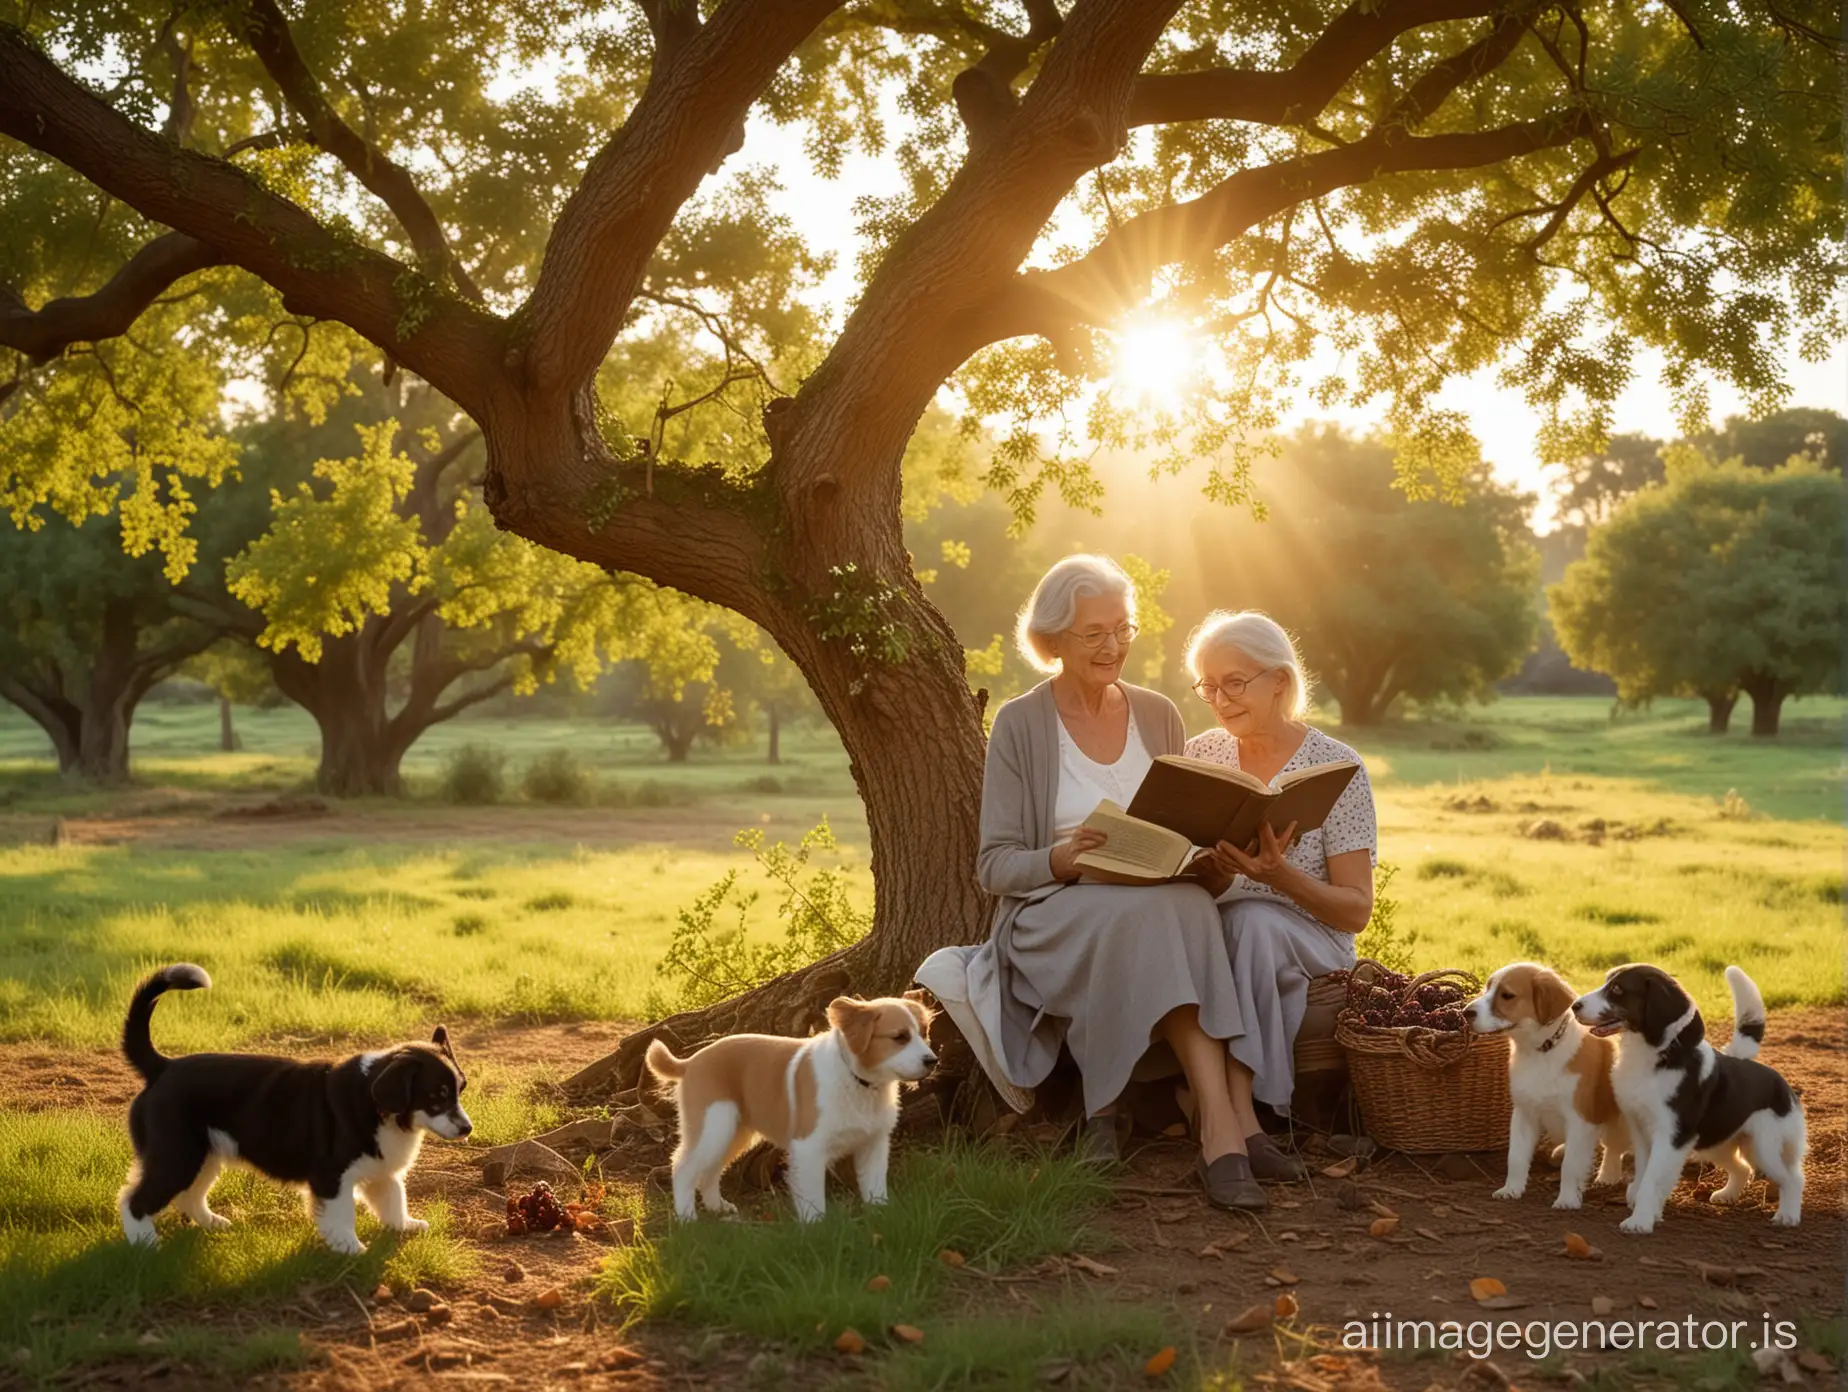 Elderly-Lady-Reading-with-Playful-Puppies-and-Girls-Picking-Blackberries-Under-an-Oak-Tree